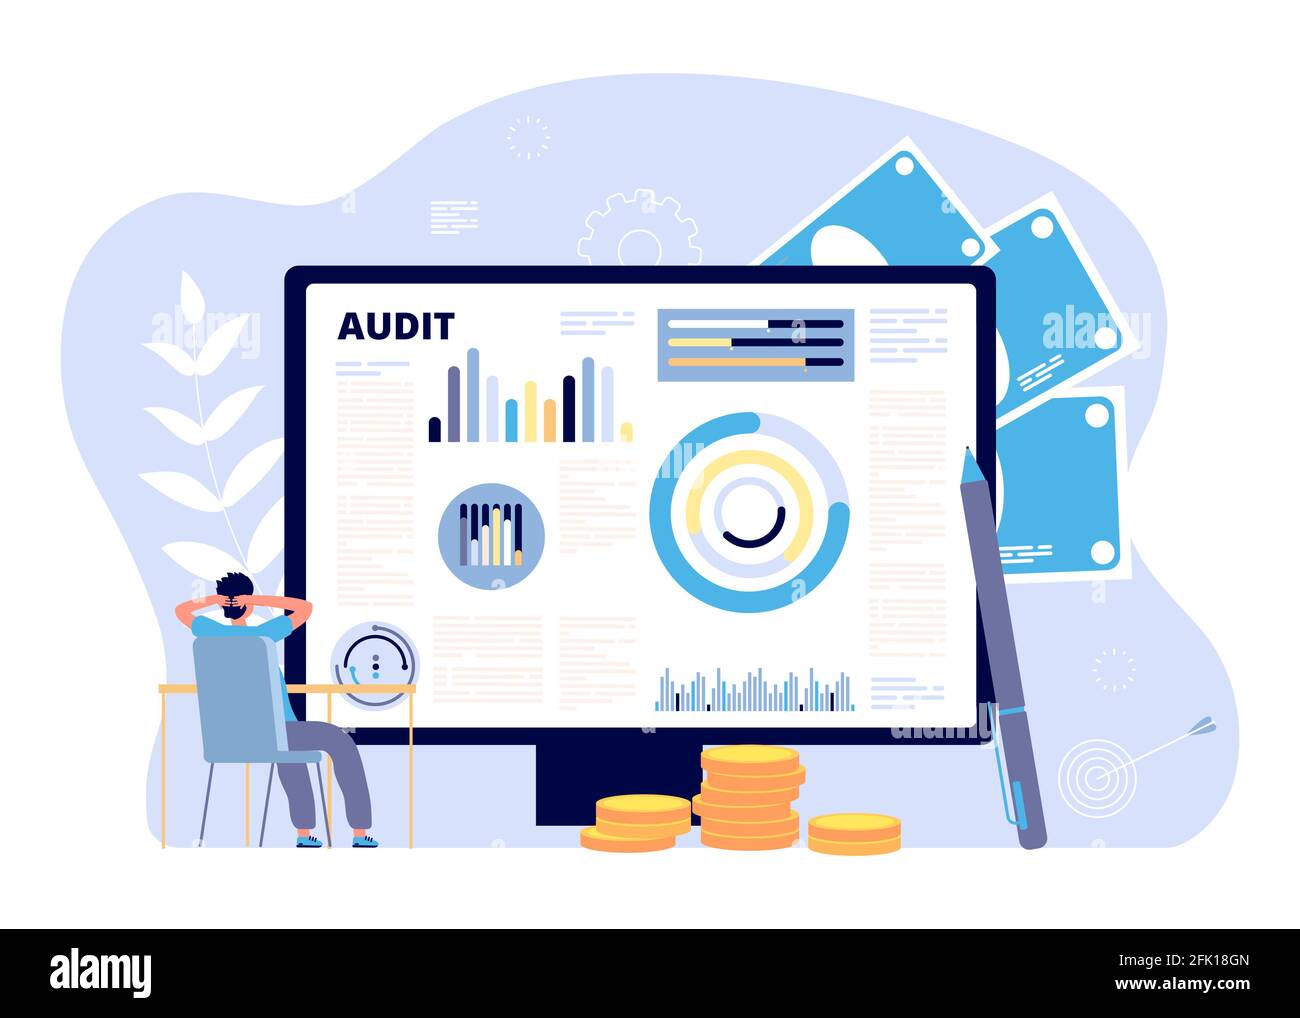 Financial audit concept. Business strategies, risk inspect. Economy research and analysis, assessment stock. Balance control or finance education Stock Vector